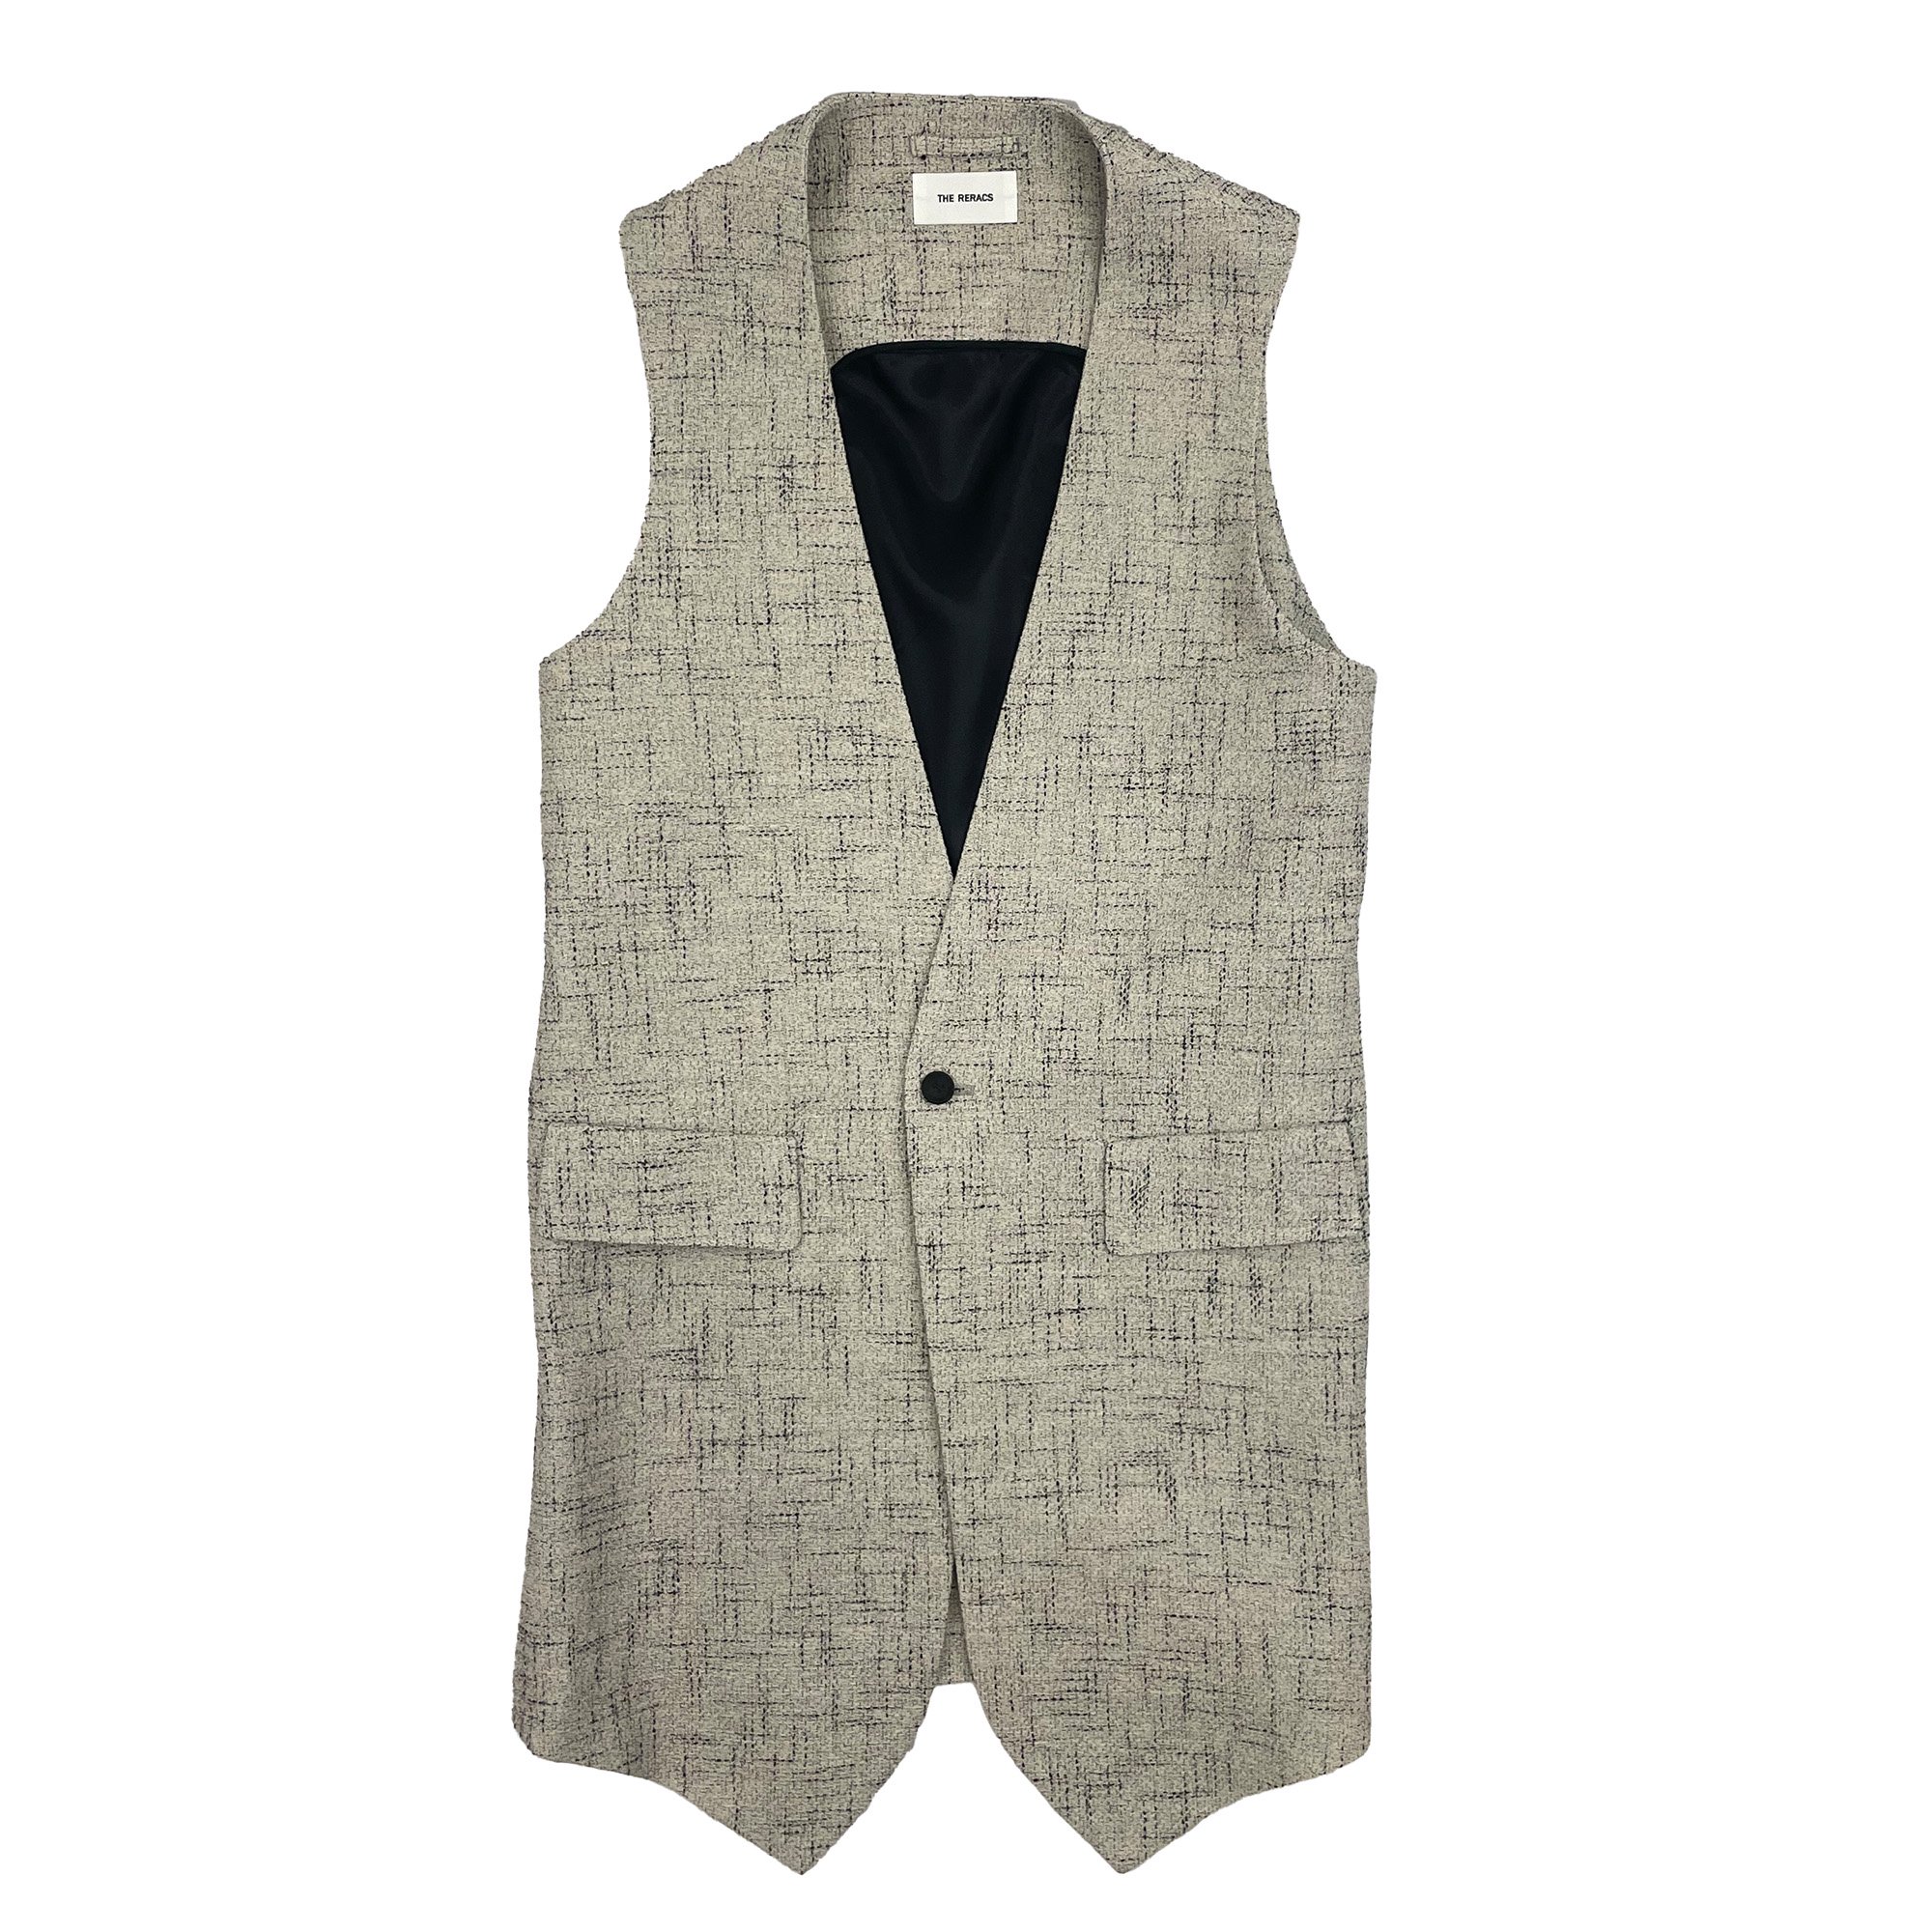 <img class='new_mark_img1' src='https://img.shop-pro.jp/img/new/icons7.gif' style='border:none;display:inline;margin:0px;padding:0px;width:auto;' />THE RERACS LONG VEST